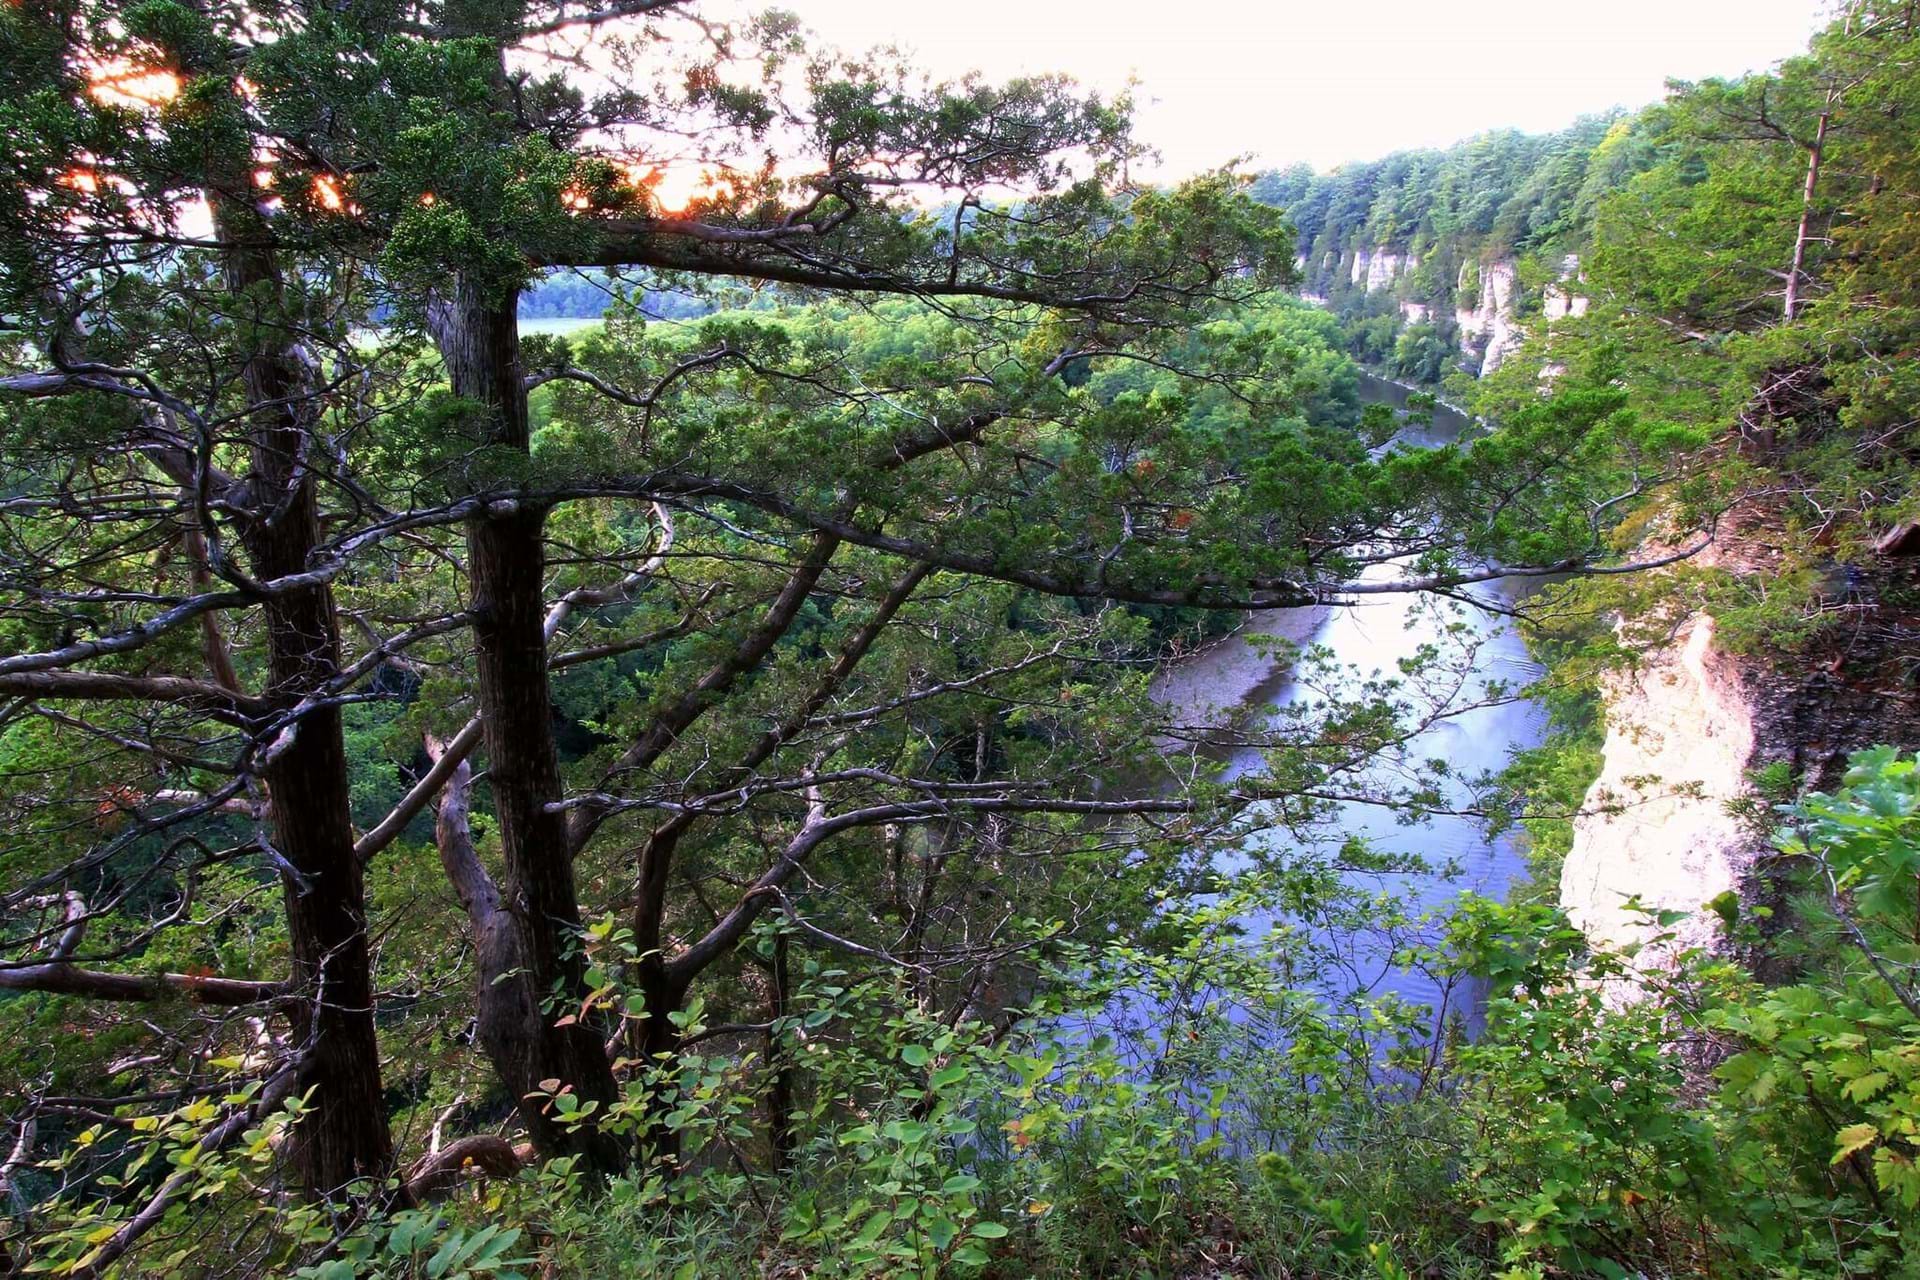 A view from on top of the bluffs through some foliage looking down towards the Upper Iowa river